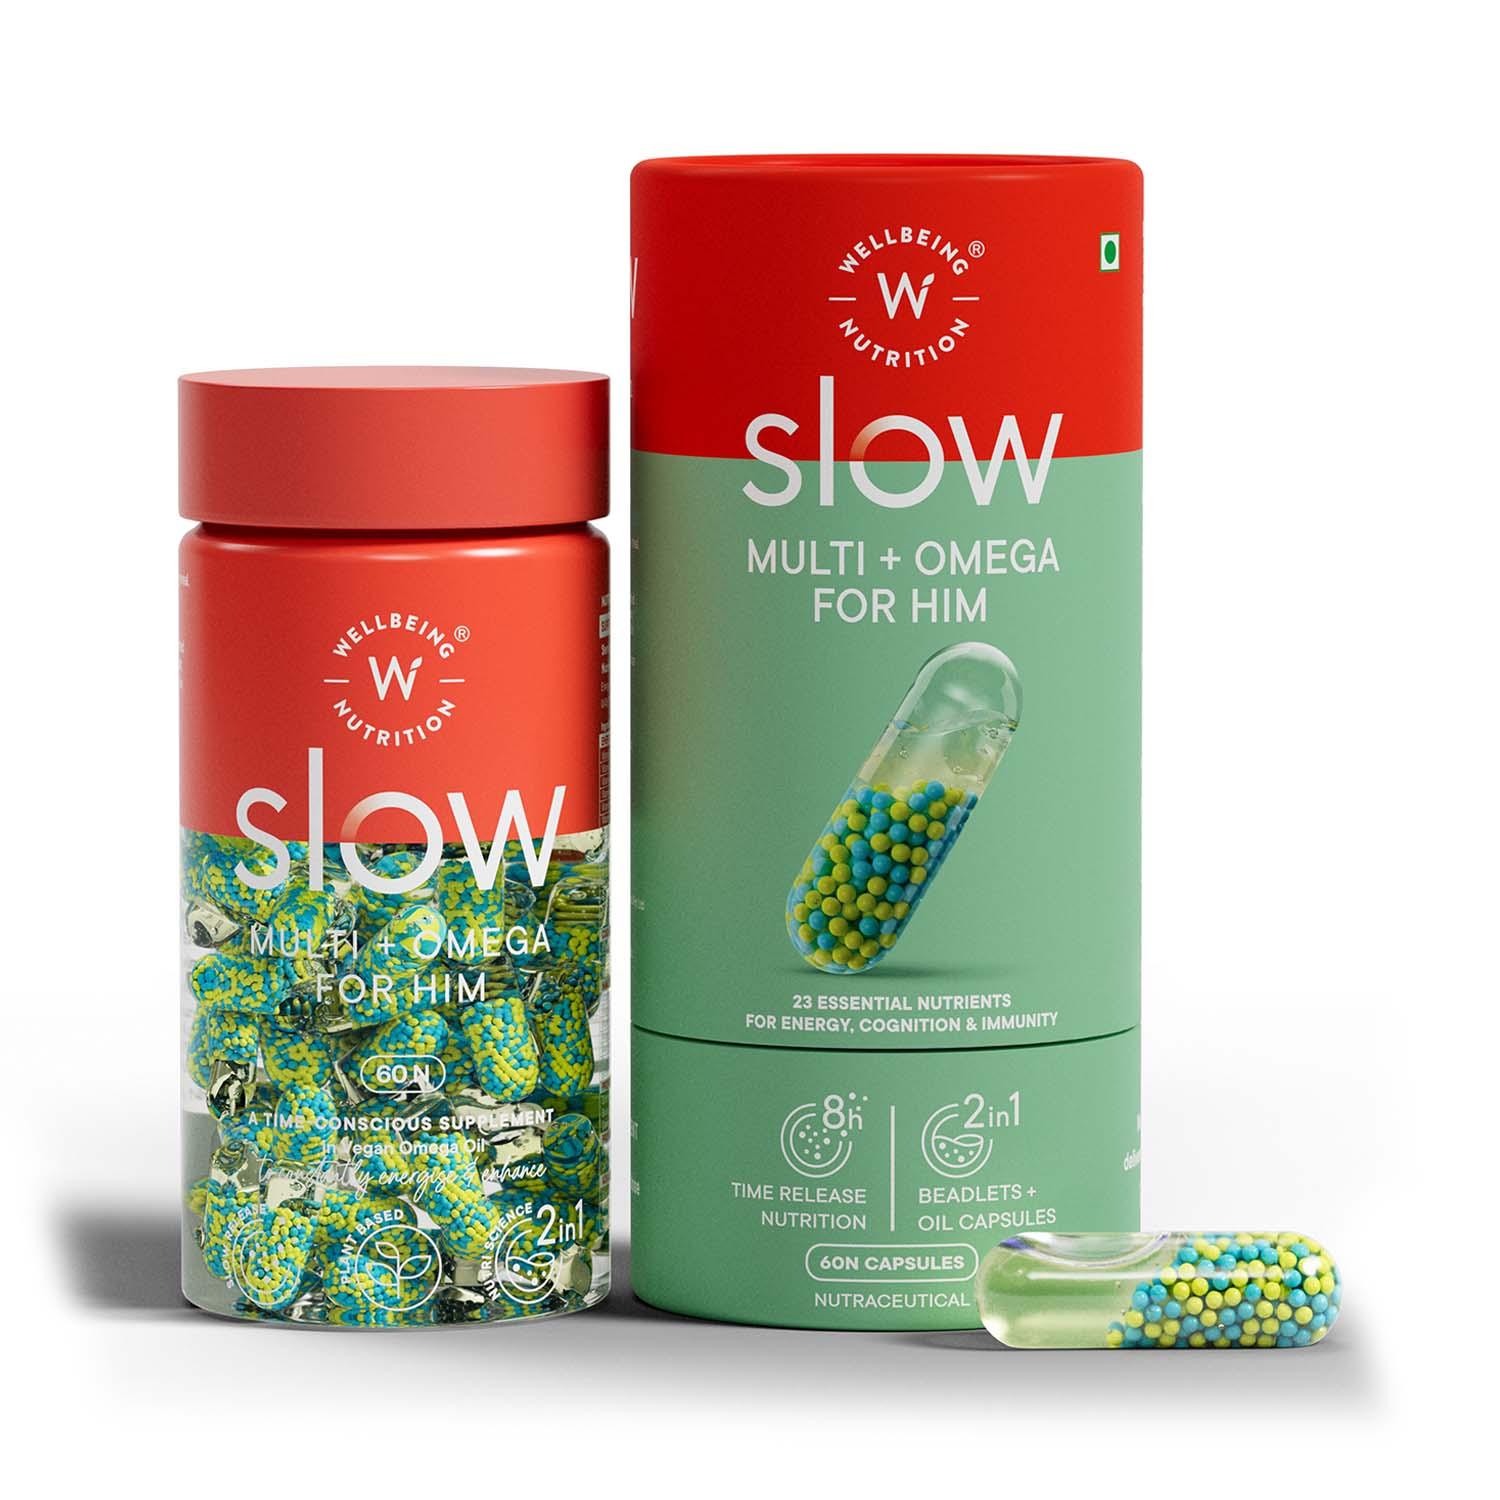 Wellbeing Nutrition | Wellbeing Nutrition Slow Multivitamin For Him (100% RDA) for Immunity, Energy and PMS Support